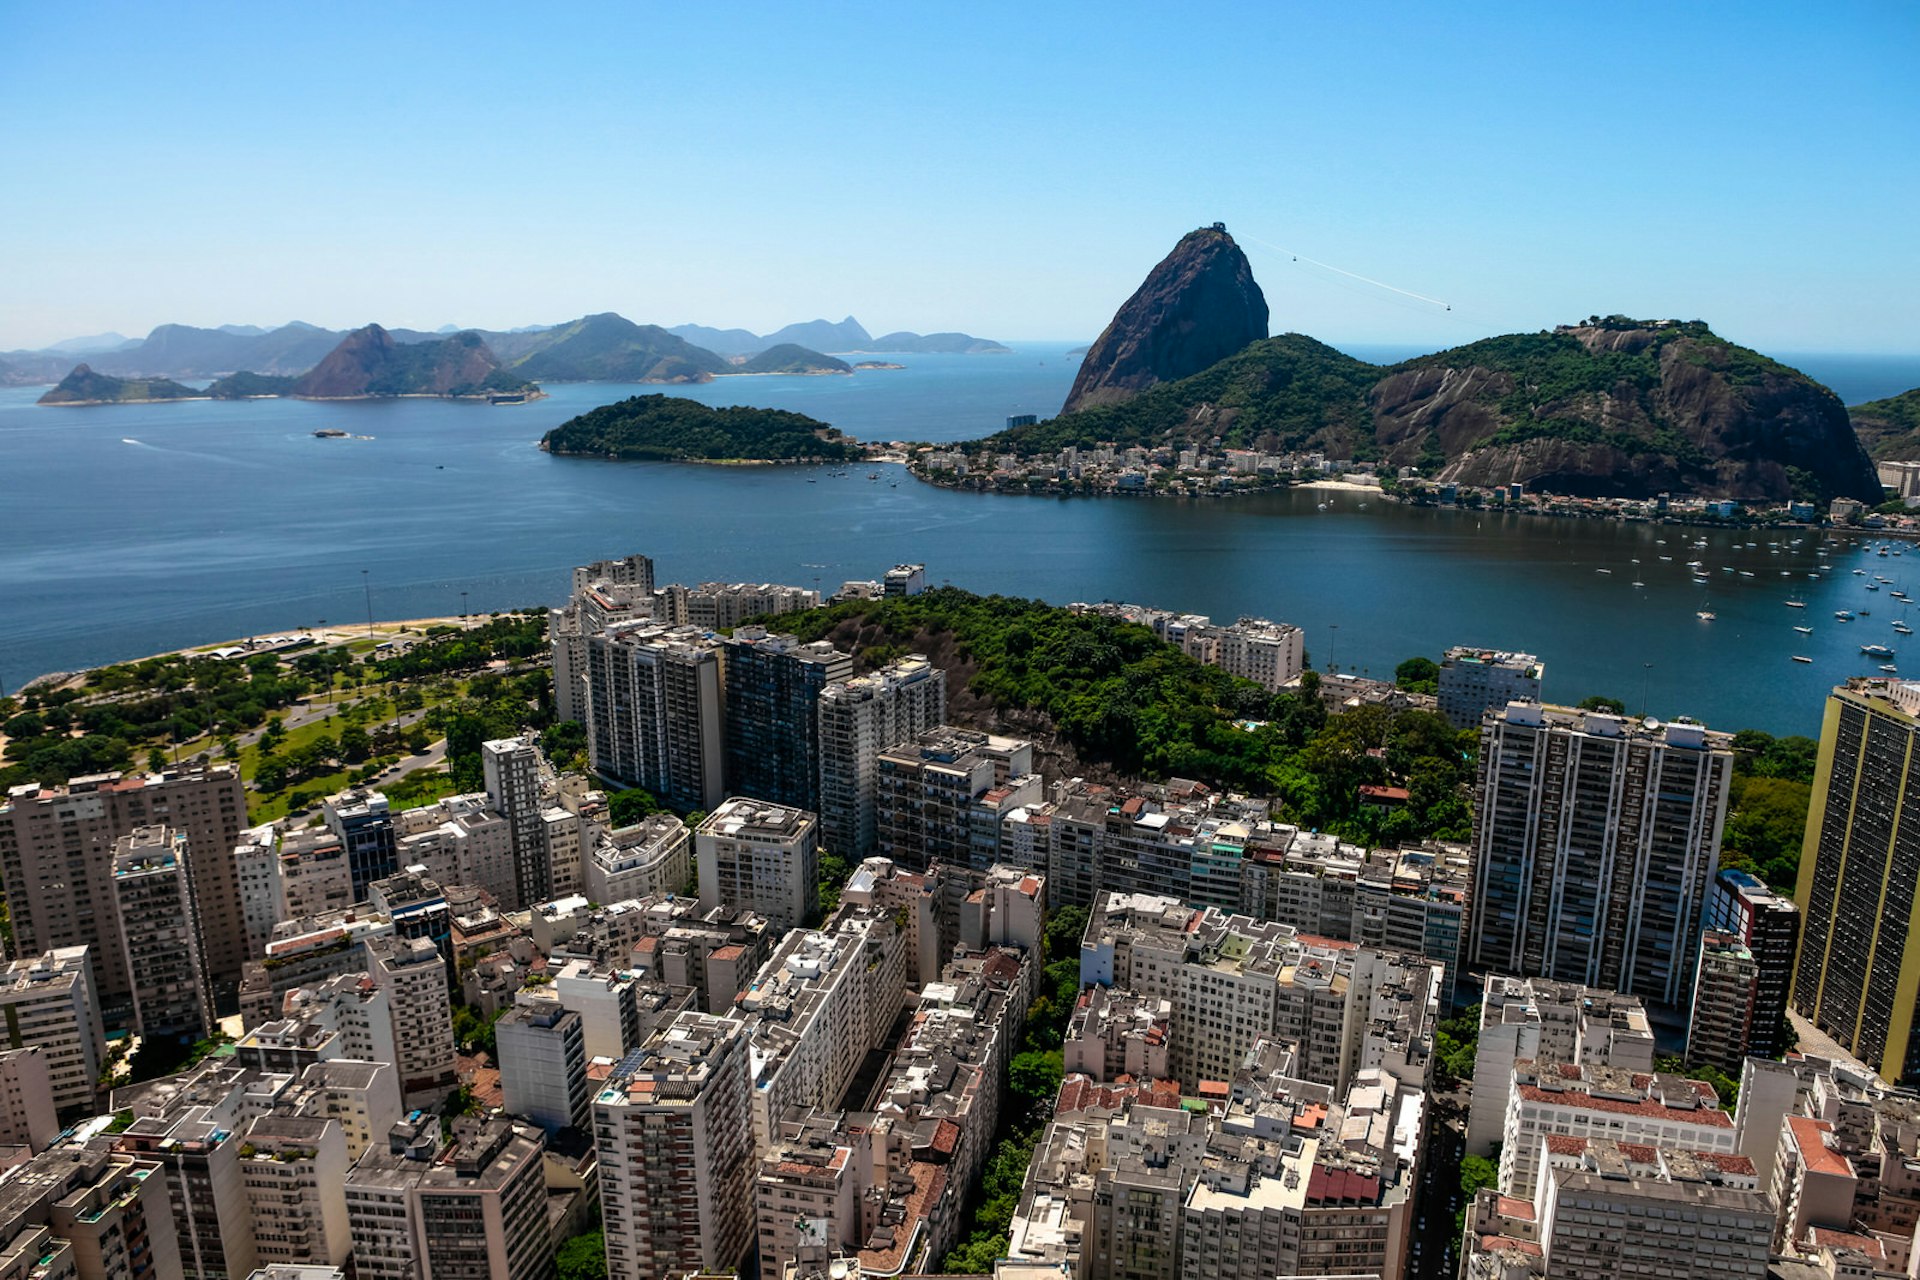 An aerial view of Botafogo, with a view of Sugarloaf Mountain © Moskow / Getty Images